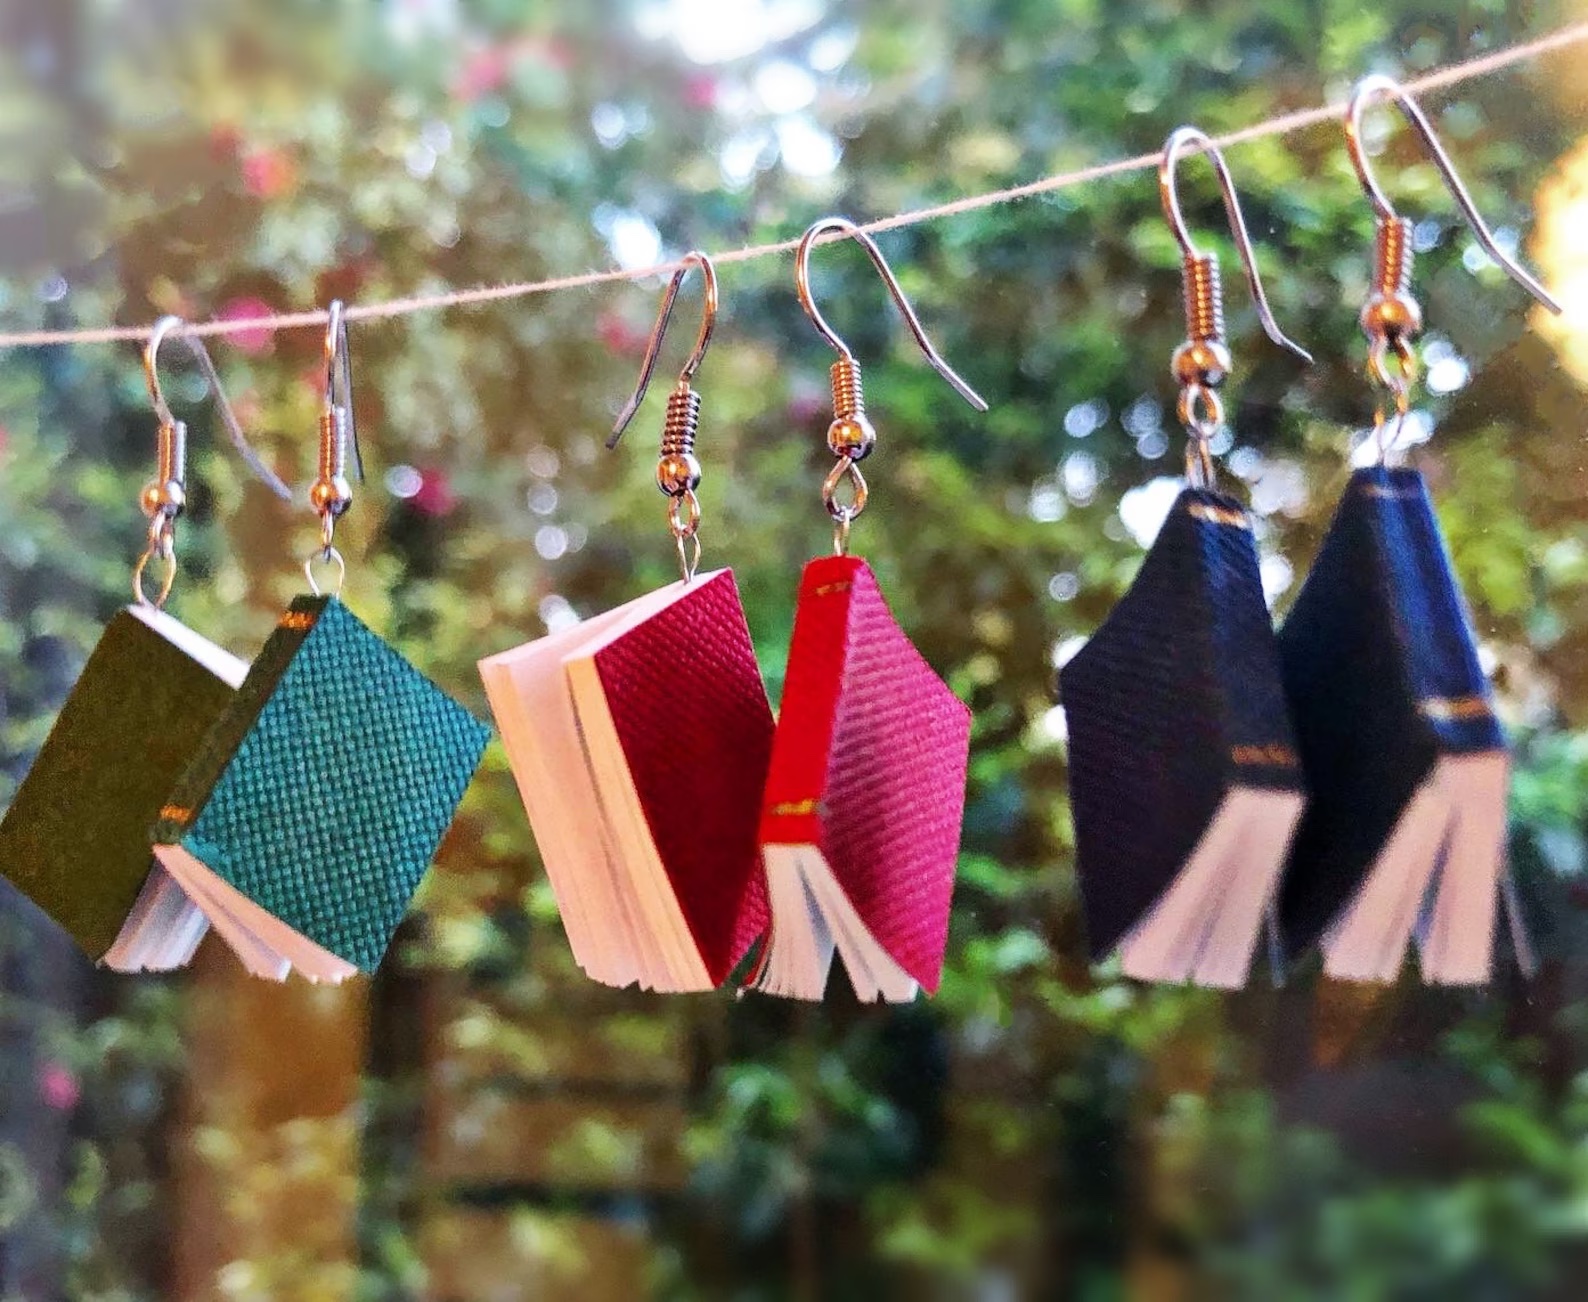 a photo of three pair of mini book earrings hanging from a strings. they are dangly earrings in red, blue, and green